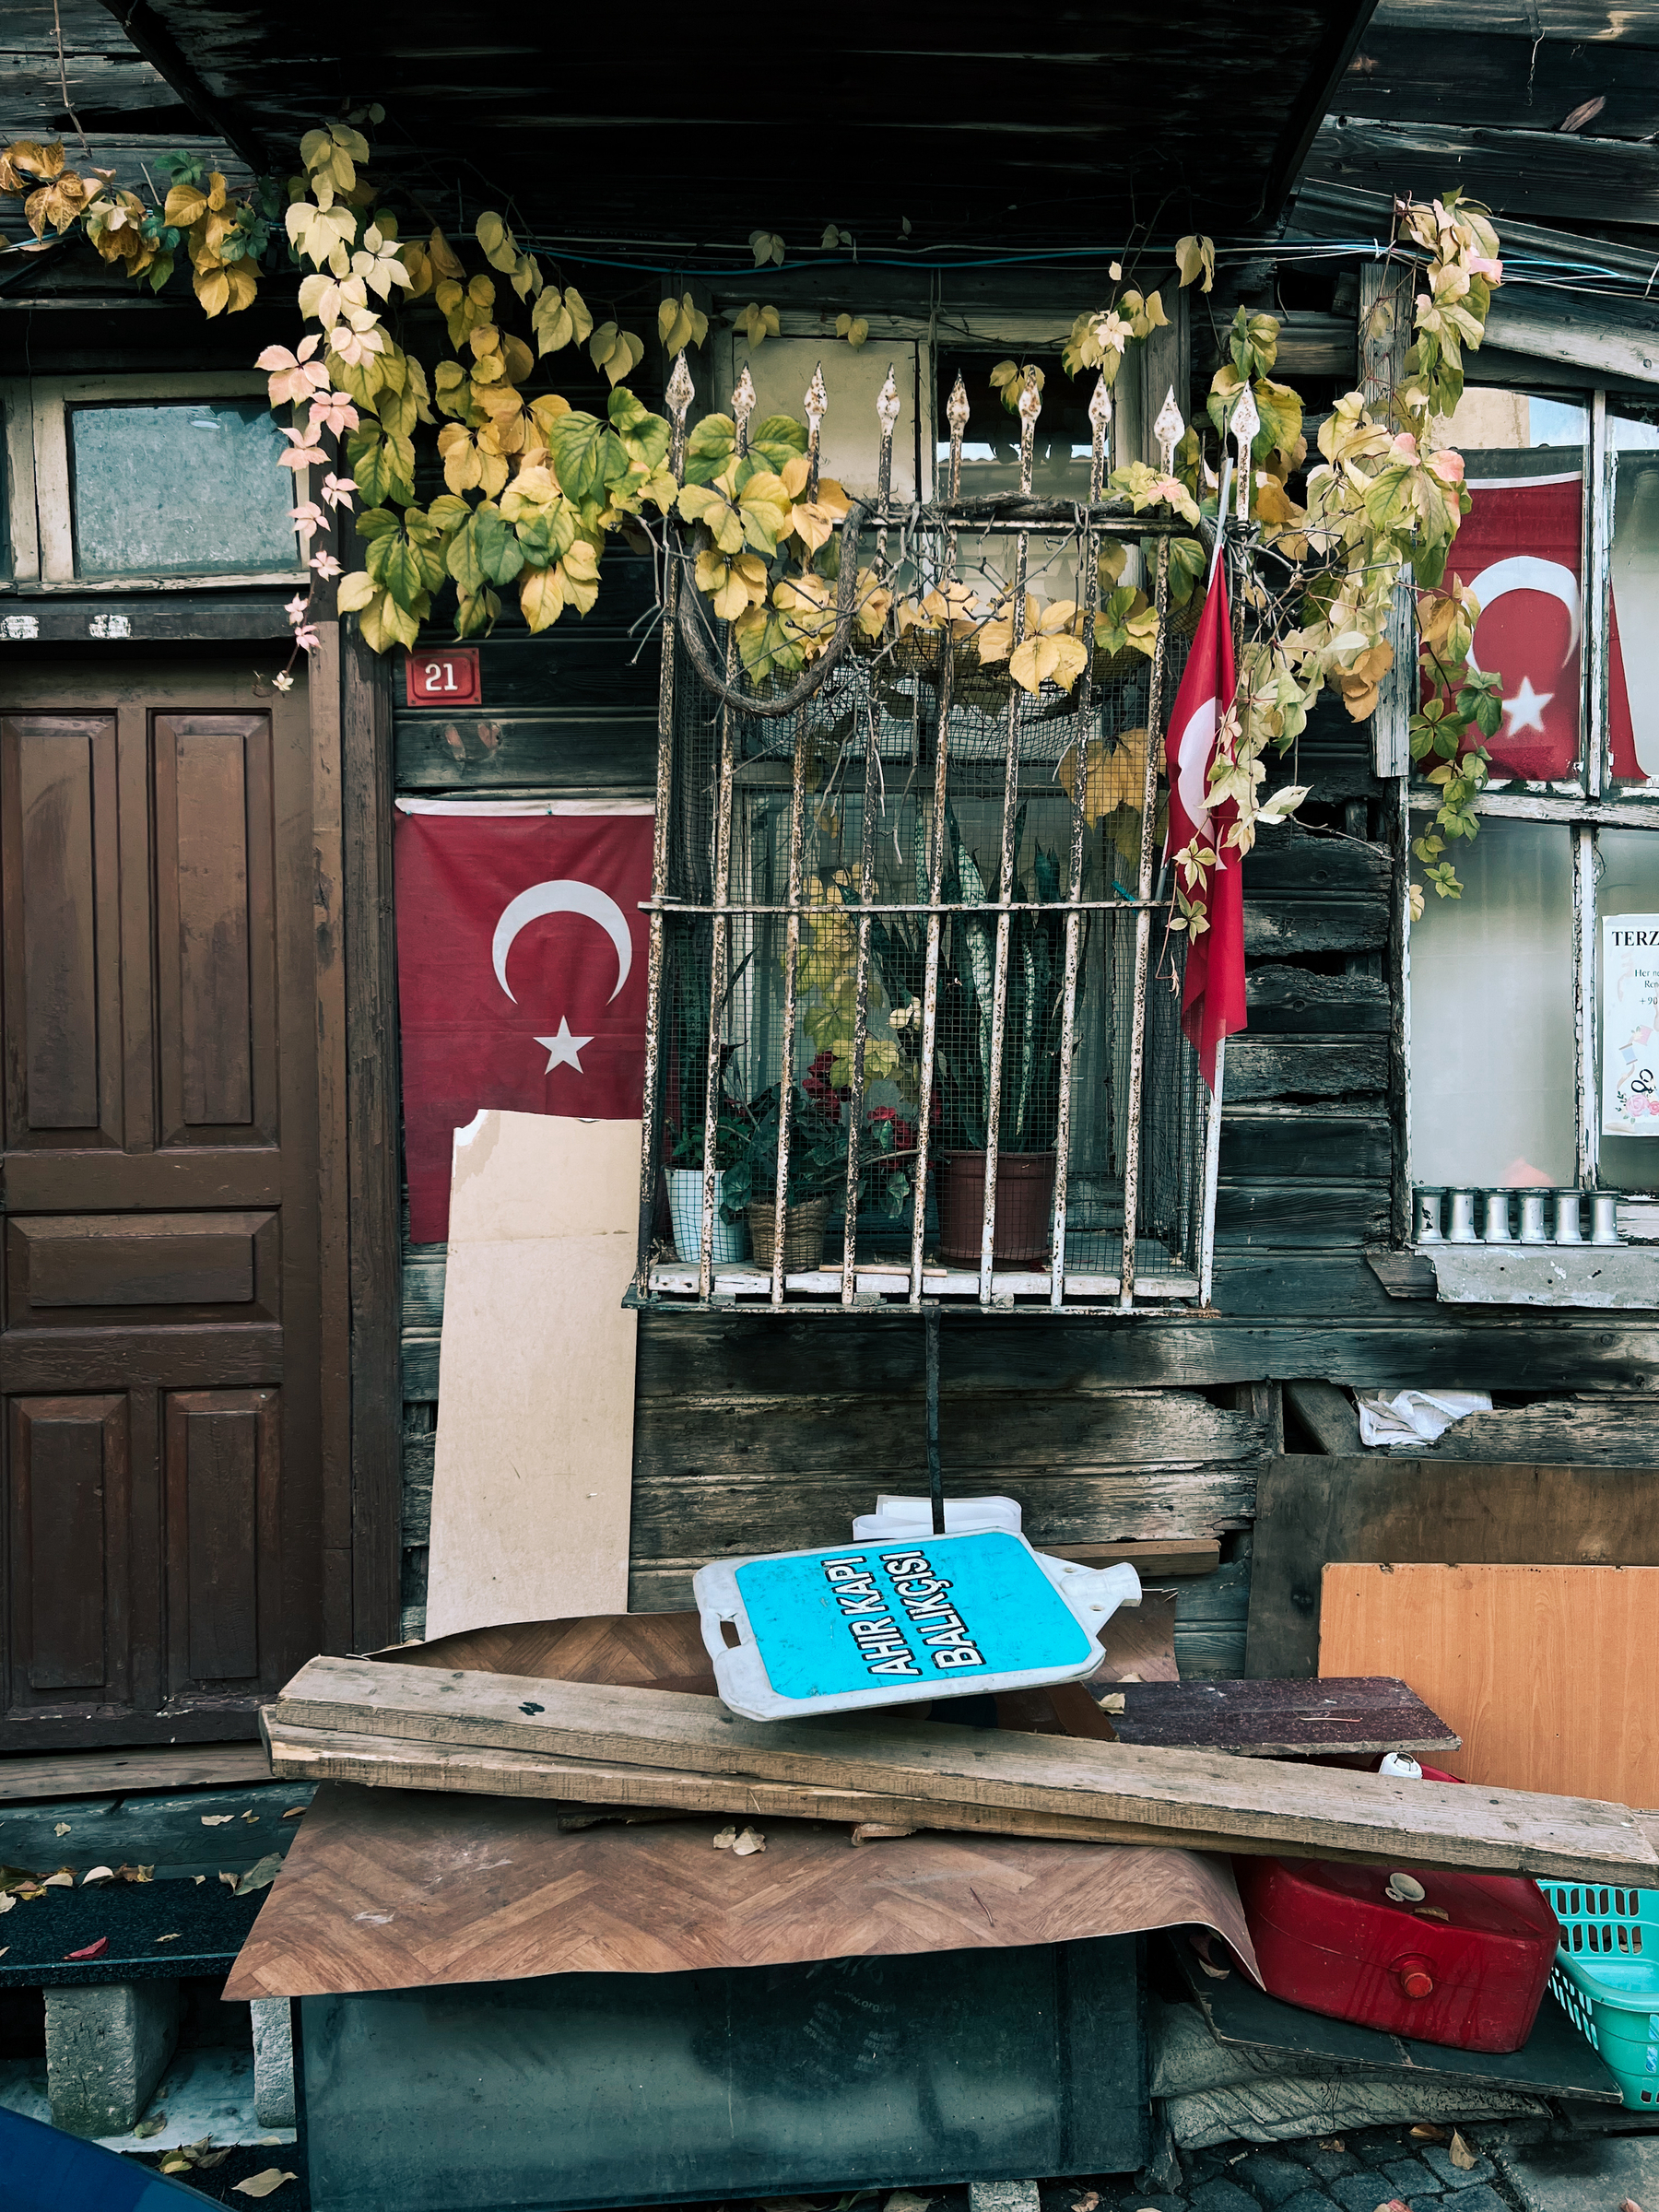 Turkish flags on abandoned building. 